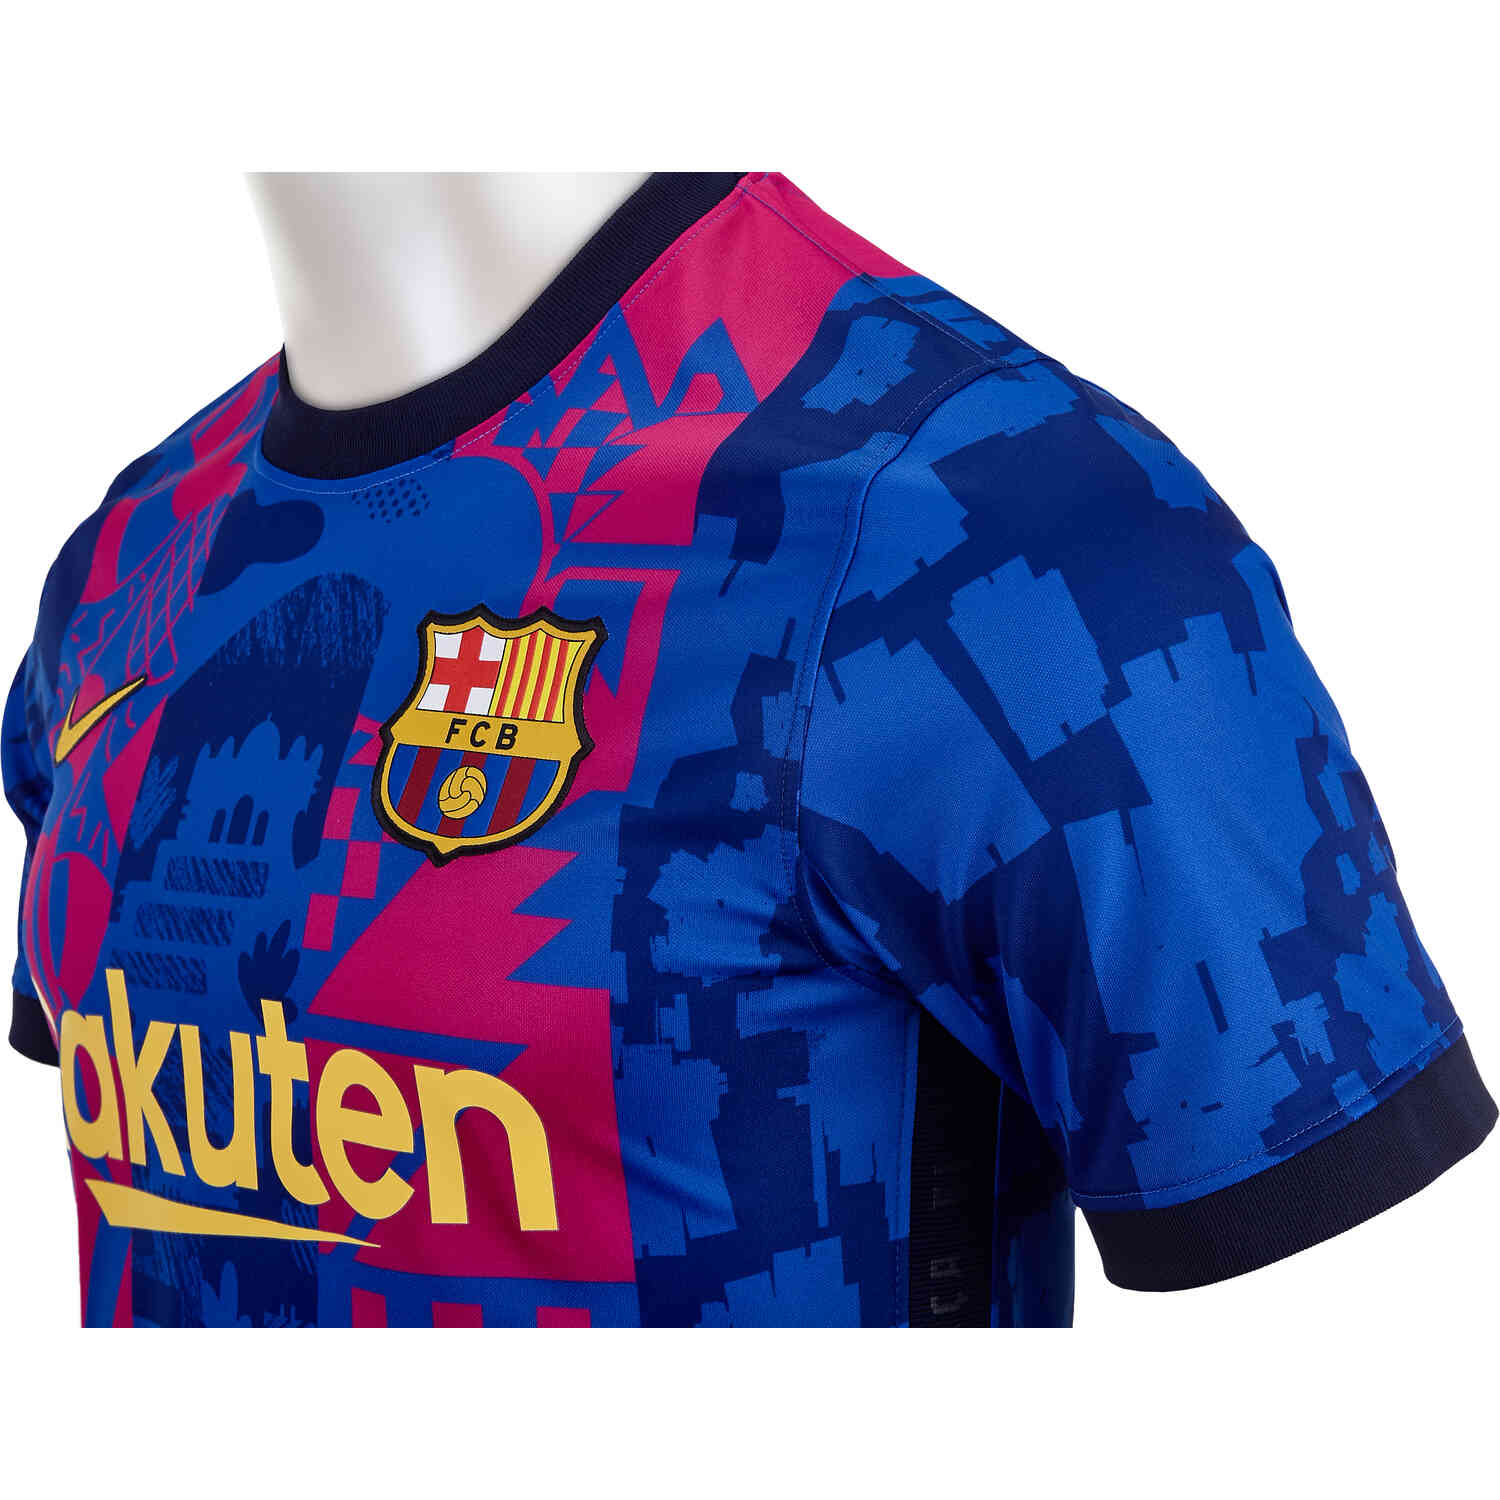 Ferran Torres' jersey available for sale on the official Barcelona store